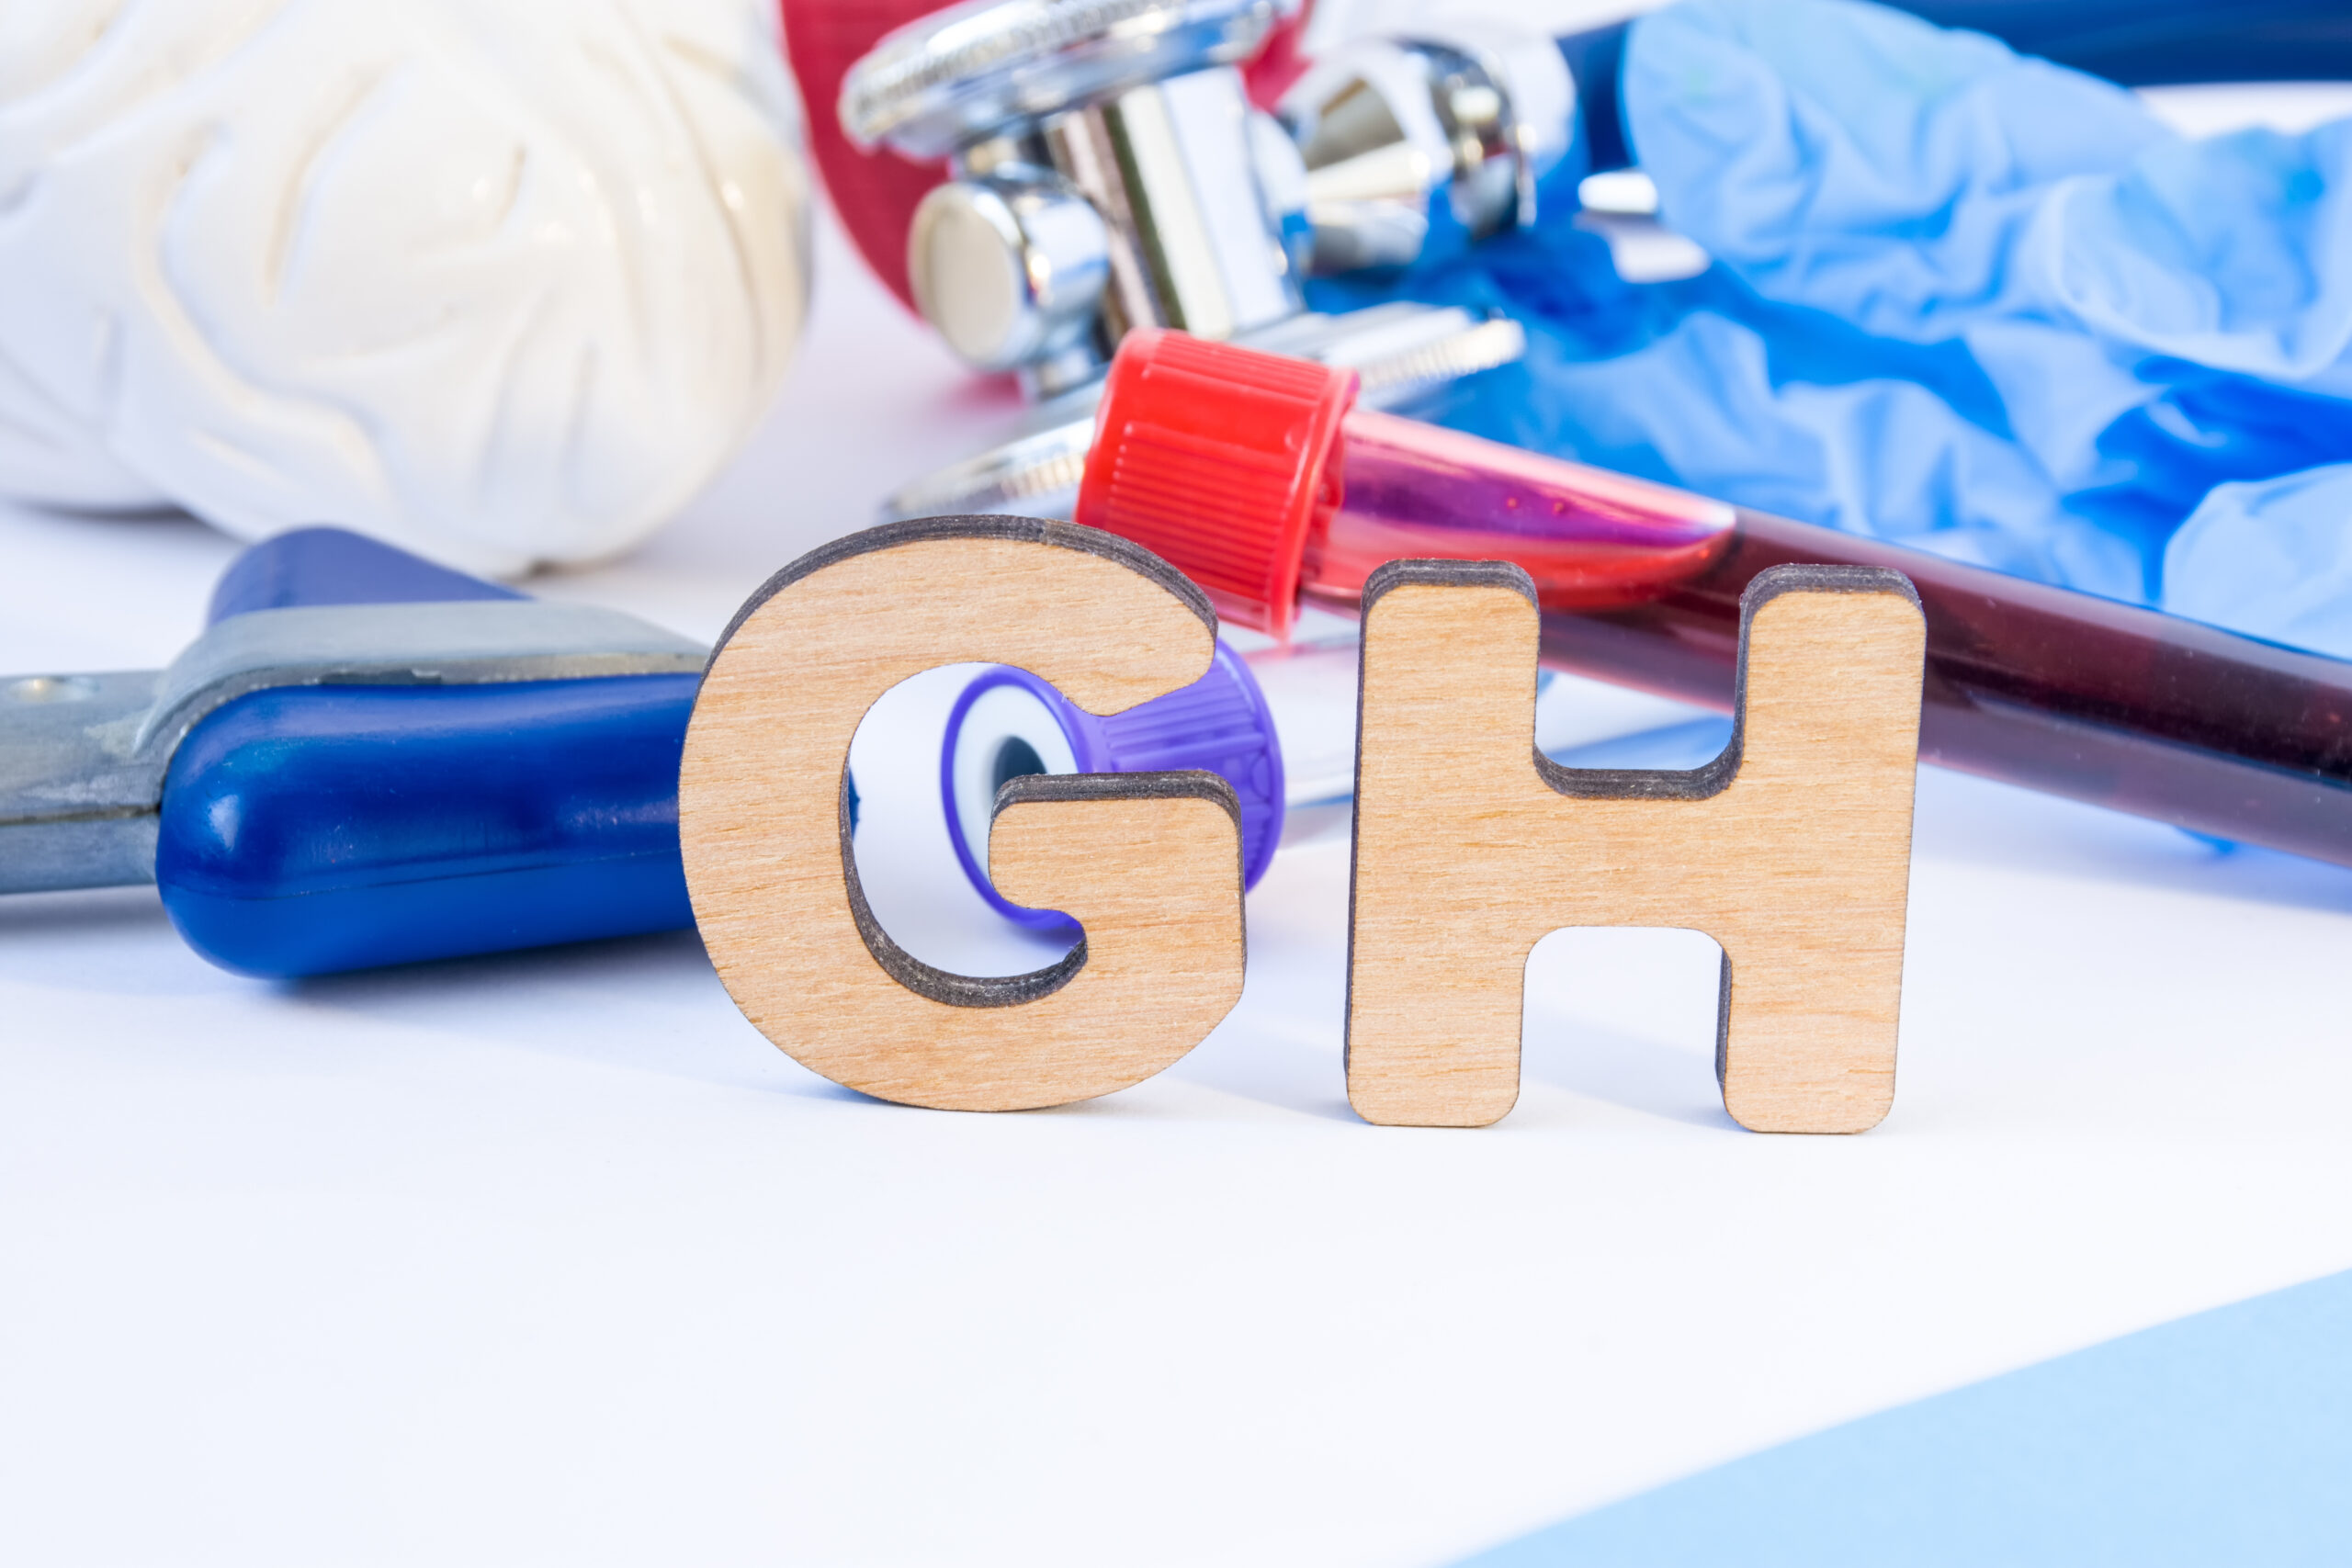 GH abbreviation or acronym in foreground in laboratory scientific or medical practice meaning growth hormone or somatotropin, with model of brain, neurological hammer laboratory test tubes stethoscope